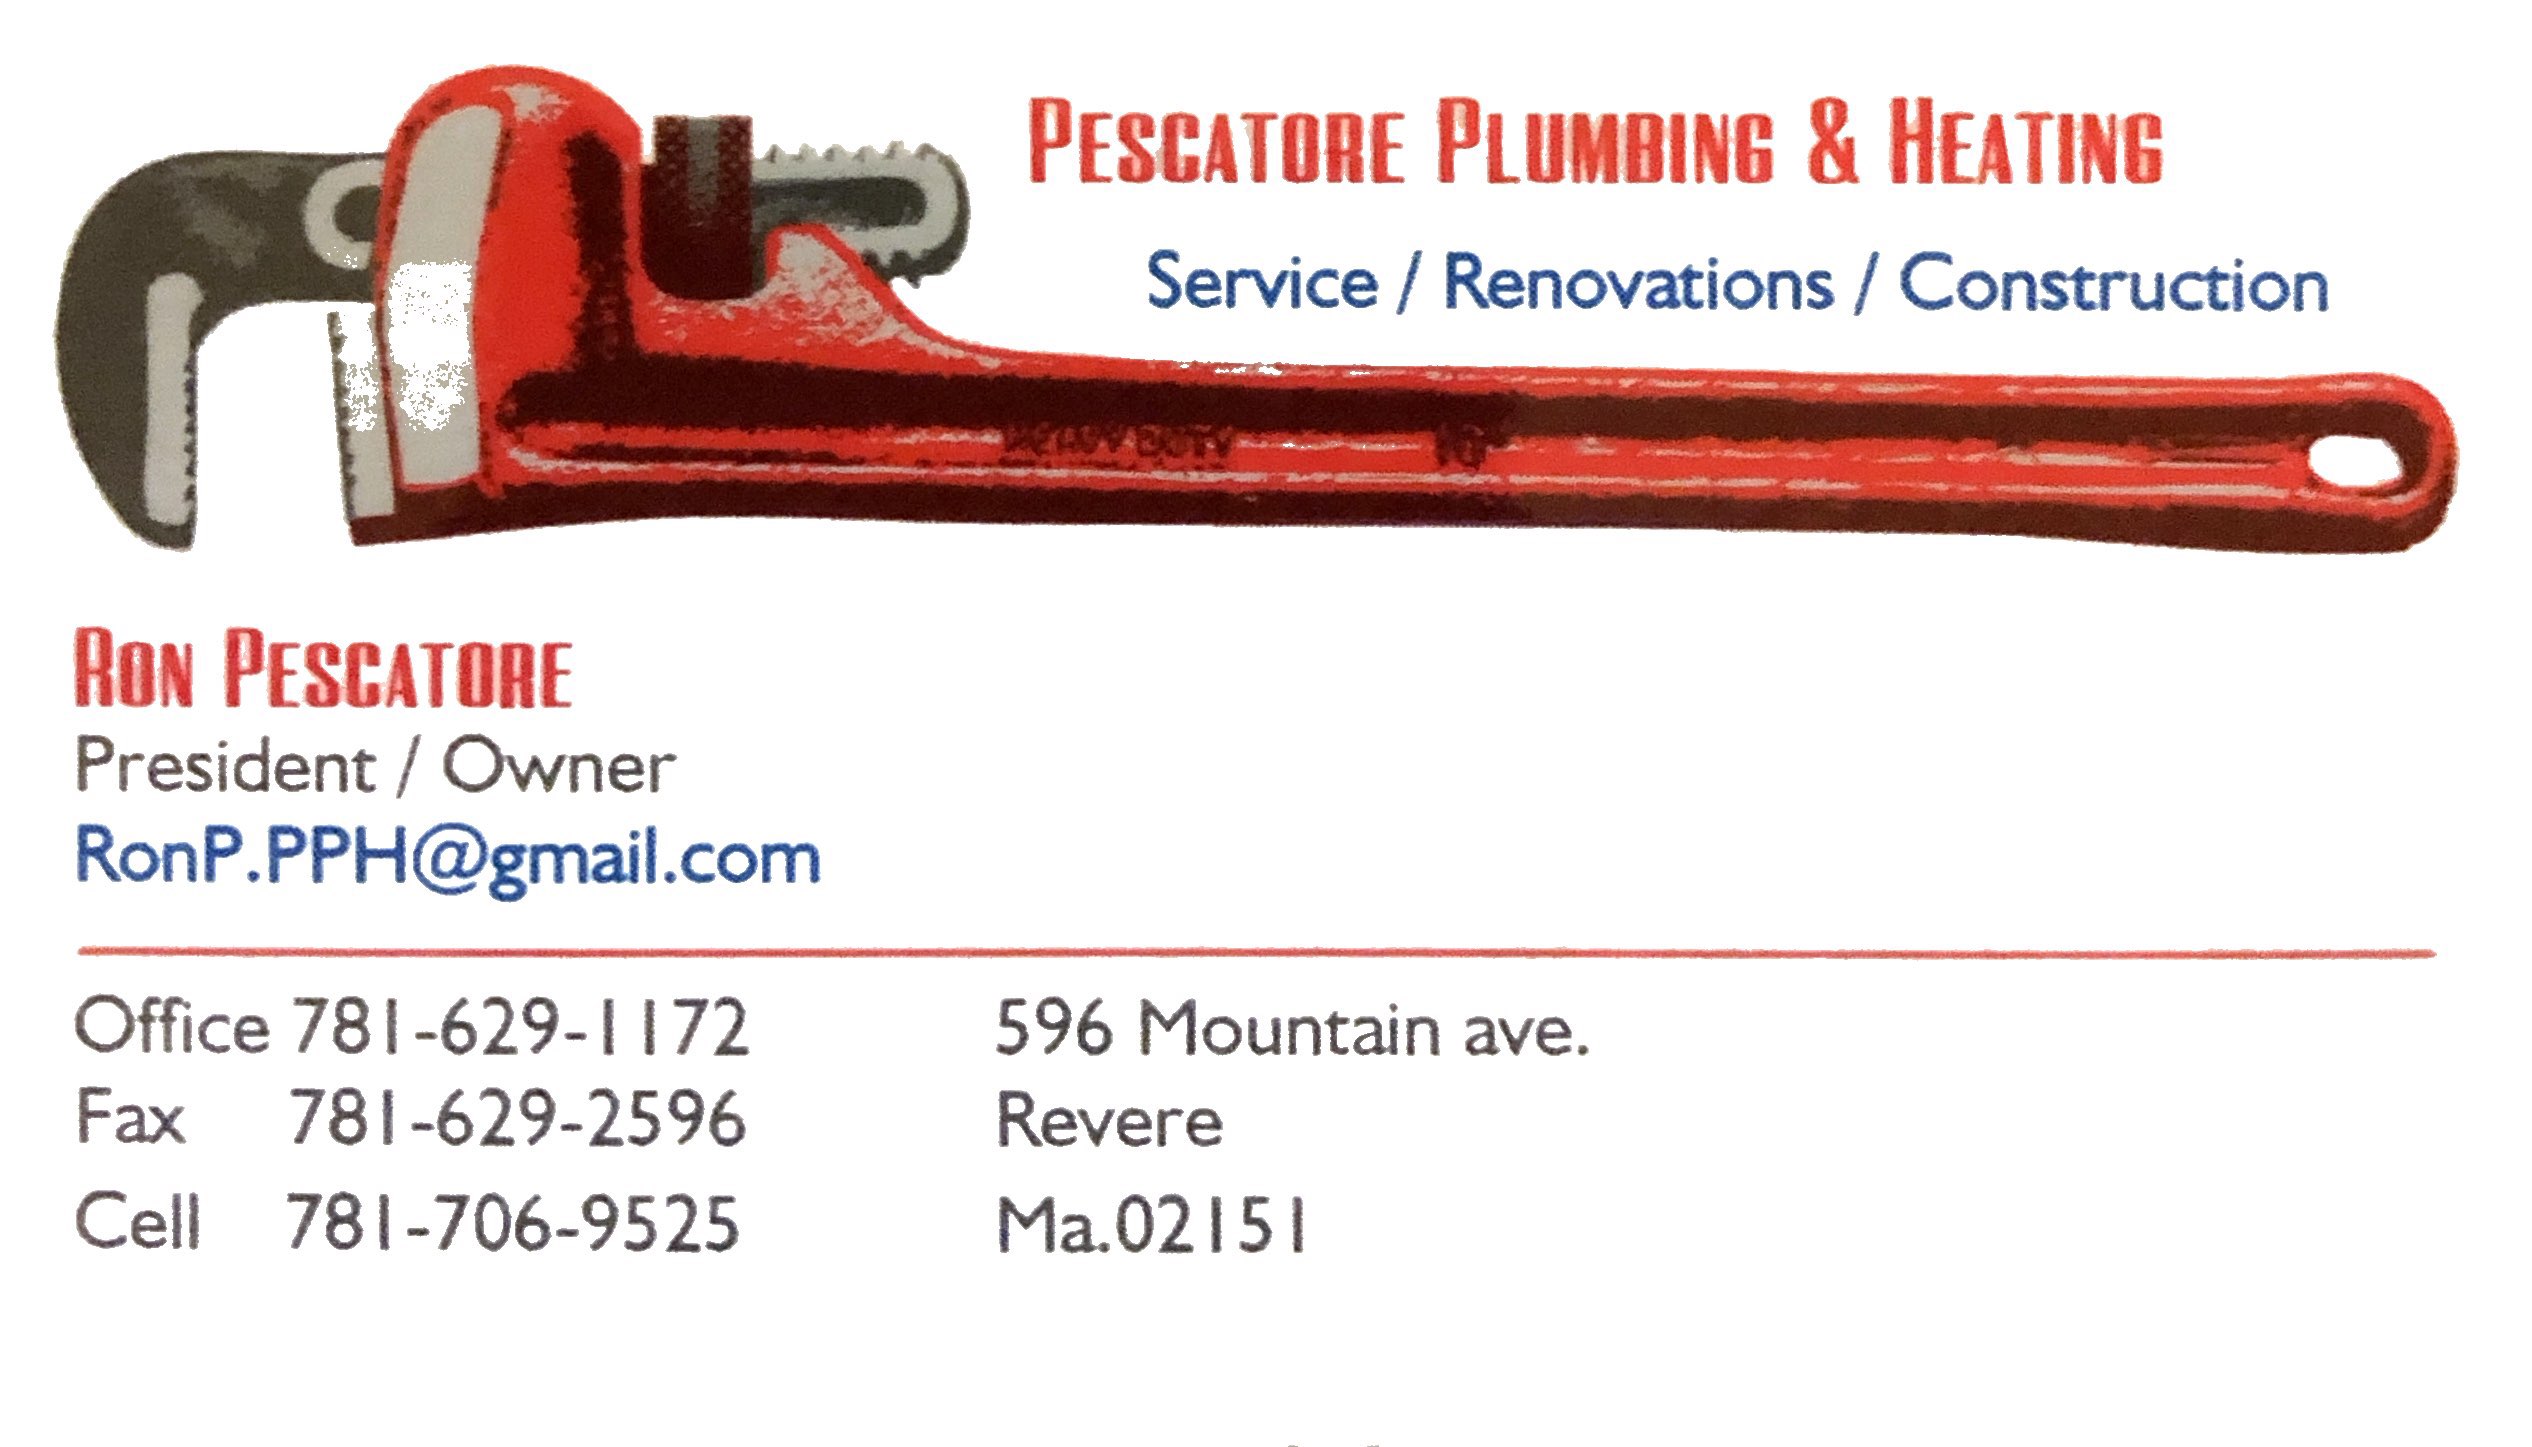 Pescatore Mechanical Contractors LLC Shares Tips on How to Choose a Great Plumbing Contractor